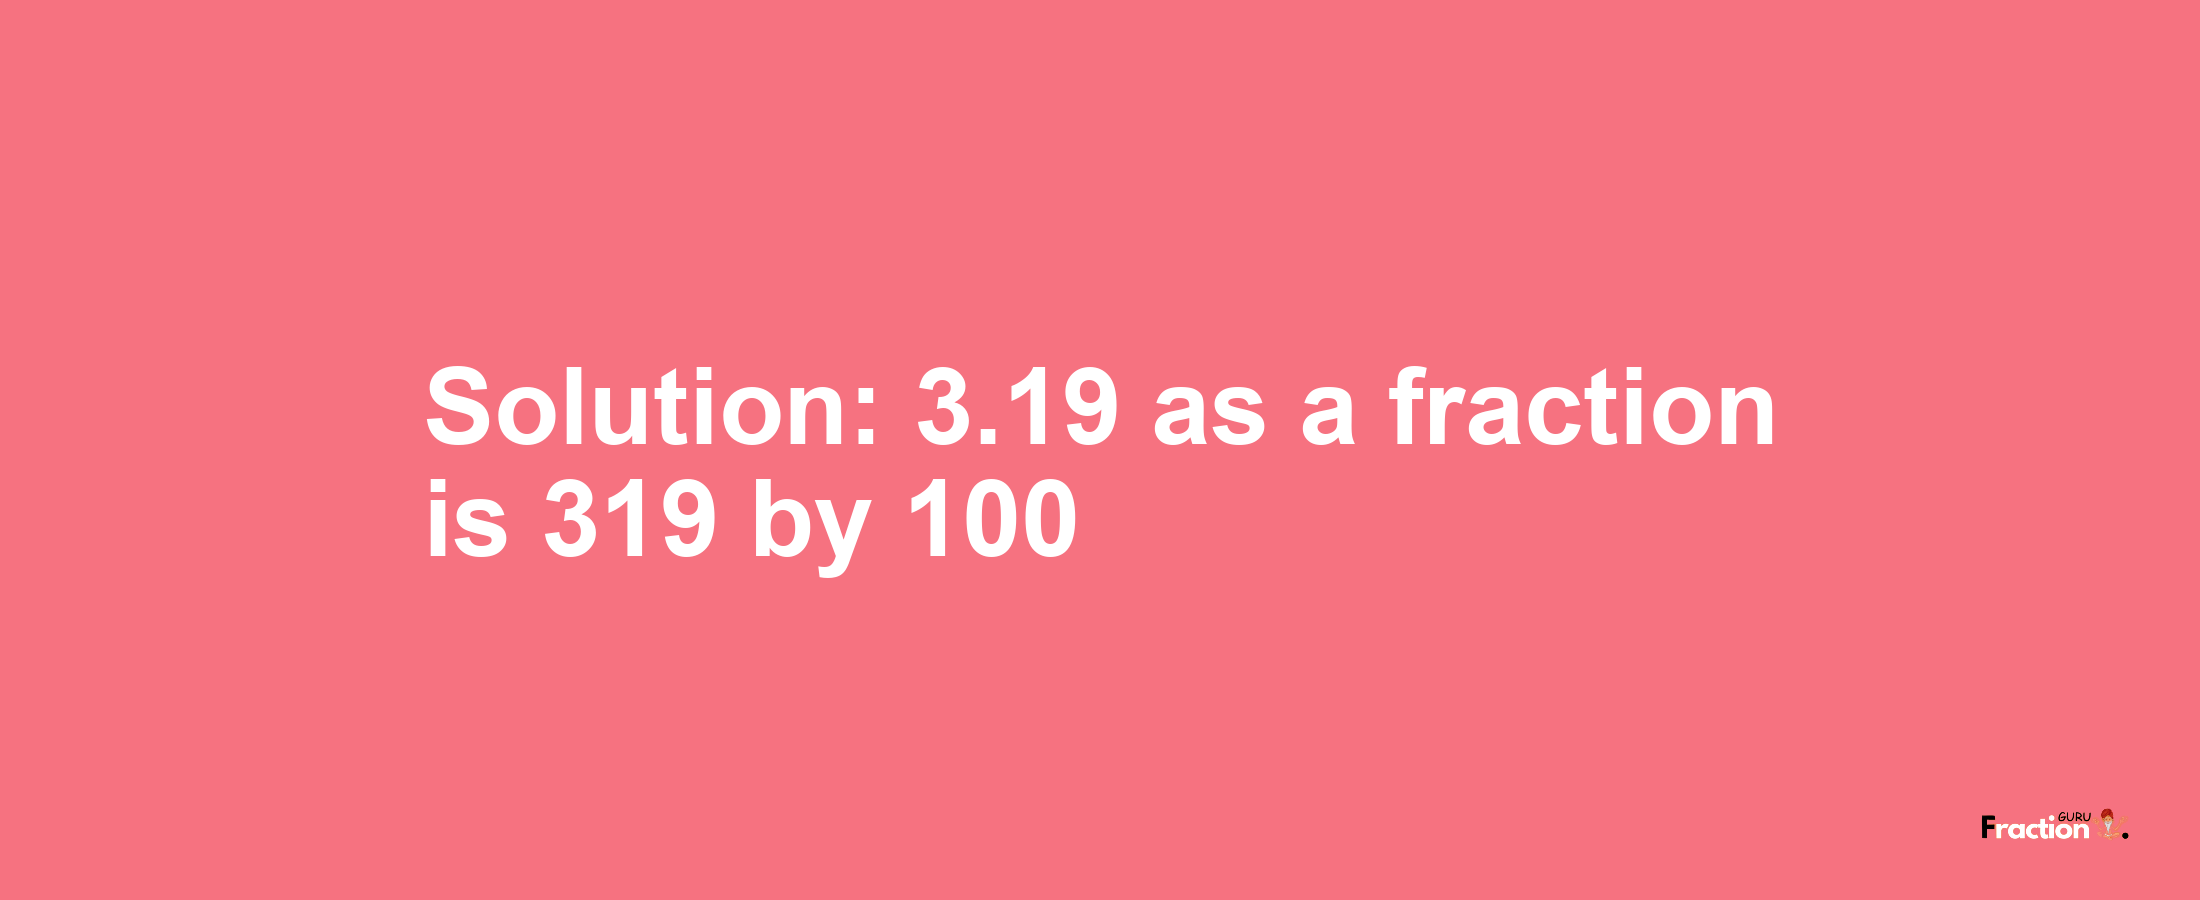 Solution:3.19 as a fraction is 319/100